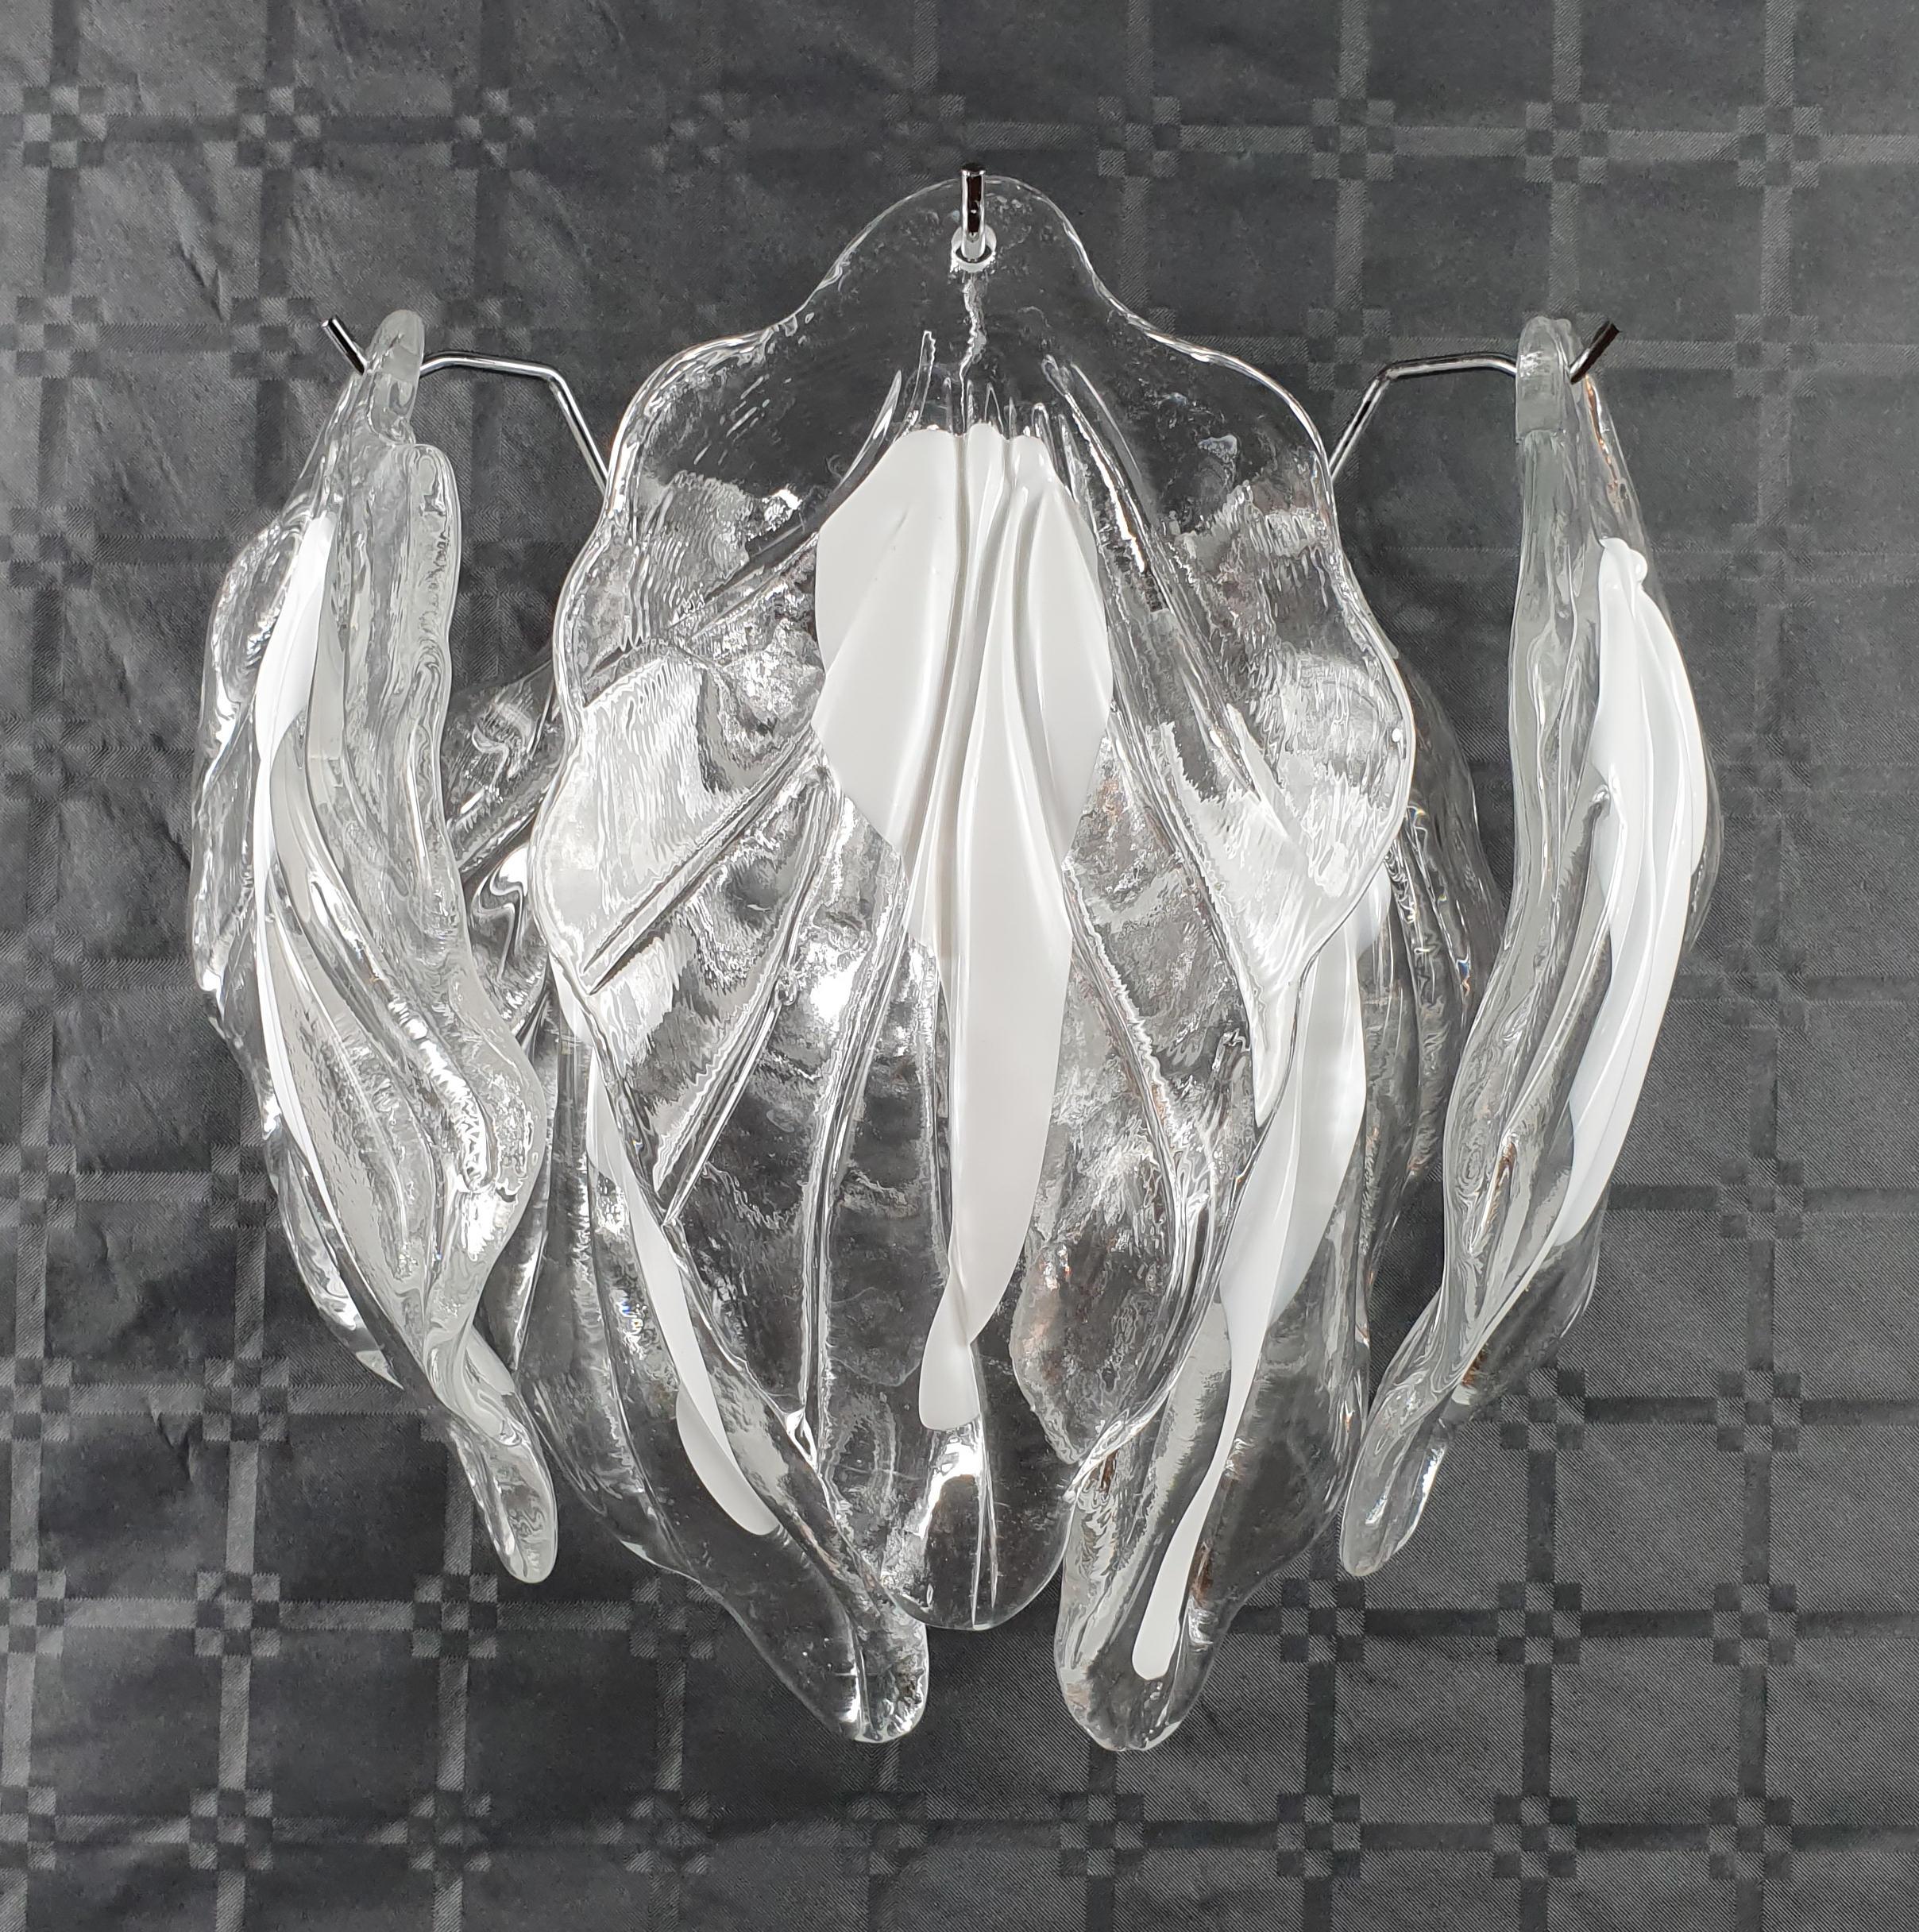 Italian wall light shown with clear and milky white hand blown Murano glass leaves mounted on chrome finish metal frame / inspired by Mazzega Made in Italy
Measures: width 12 inches, height 14 inches
2 lights / E12 or E14 type / max 40W each
Order